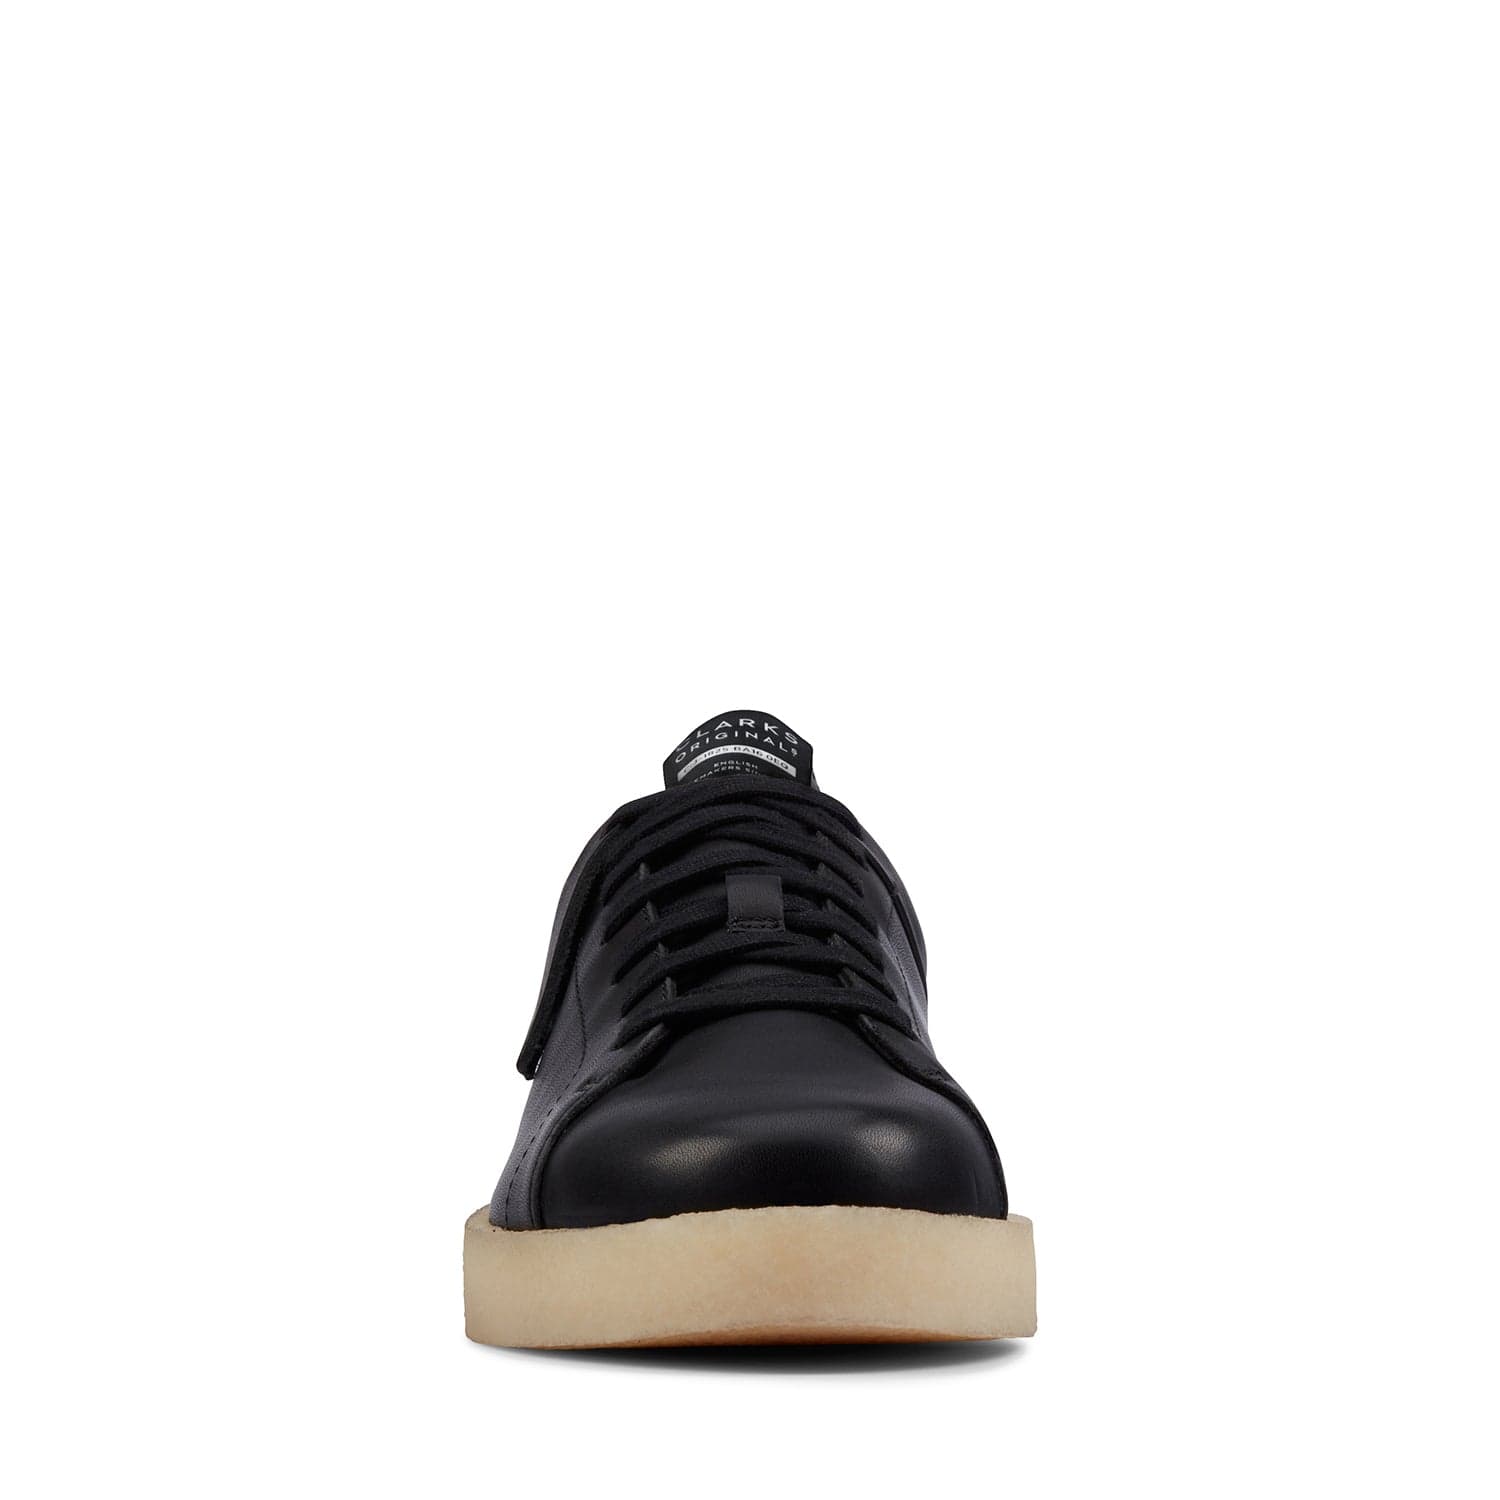 Clarks Tormatch - Shoes - Black Leather - 261620607 - G Width (Standard Fit)